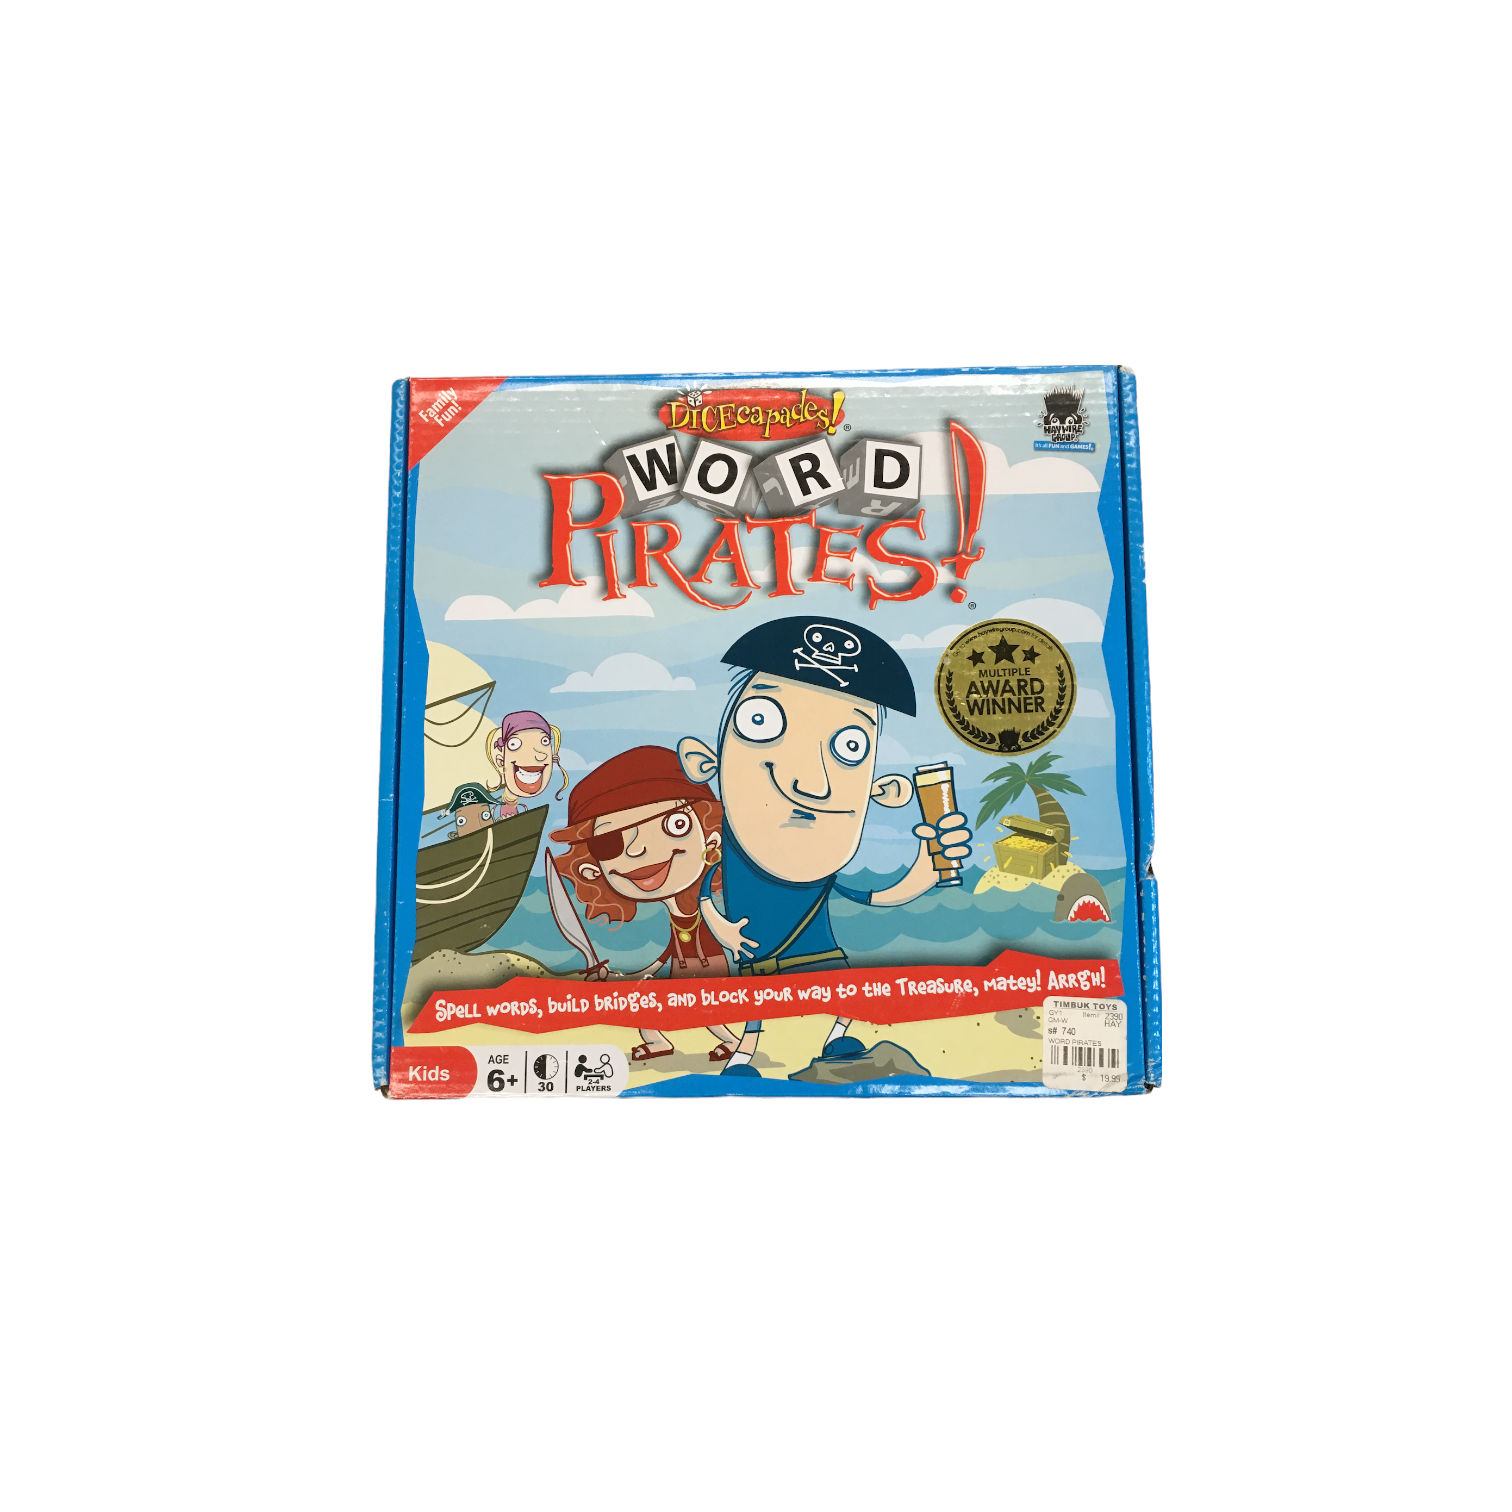 Word Pirates NWT, Toys

#resalerocks #pipsqueakresale #vancouverwa #portland #reusereducerecycle #fashiononabudget #chooseused #consignment #savemoney #shoplocal #weship #keepusopen #shoplocalonline #resale #resaleboutique #mommyandme #minime #fashion #reseller                                                                                                                                      Cross posted, items are located at #PipsqueakResaleBoutique, payments accepted: cash, paypal & credit cards. Any flaws will be described in the comments. More pictures available with link above. Local pick up available at the #VancouverMall, tax will be added (not included in price), shipping available (not included in price, *Clothing, shoes, books & DVDs for $6.99; please contact regarding shipment of toys or other larger items), item can be placed on hold with communication, message with any questions. Join Pipsqueak Resale - Online to see all the new items! Follow us on IG @pipsqueakresale & Thanks for looking! Due to the nature of consignment, any known flaws will be described; ALL SHIPPED SALES ARE FINAL. All items are currently located inside Pipsqueak Resale Boutique as a store front items purchased on location before items are prepared for shipment will be refunded.